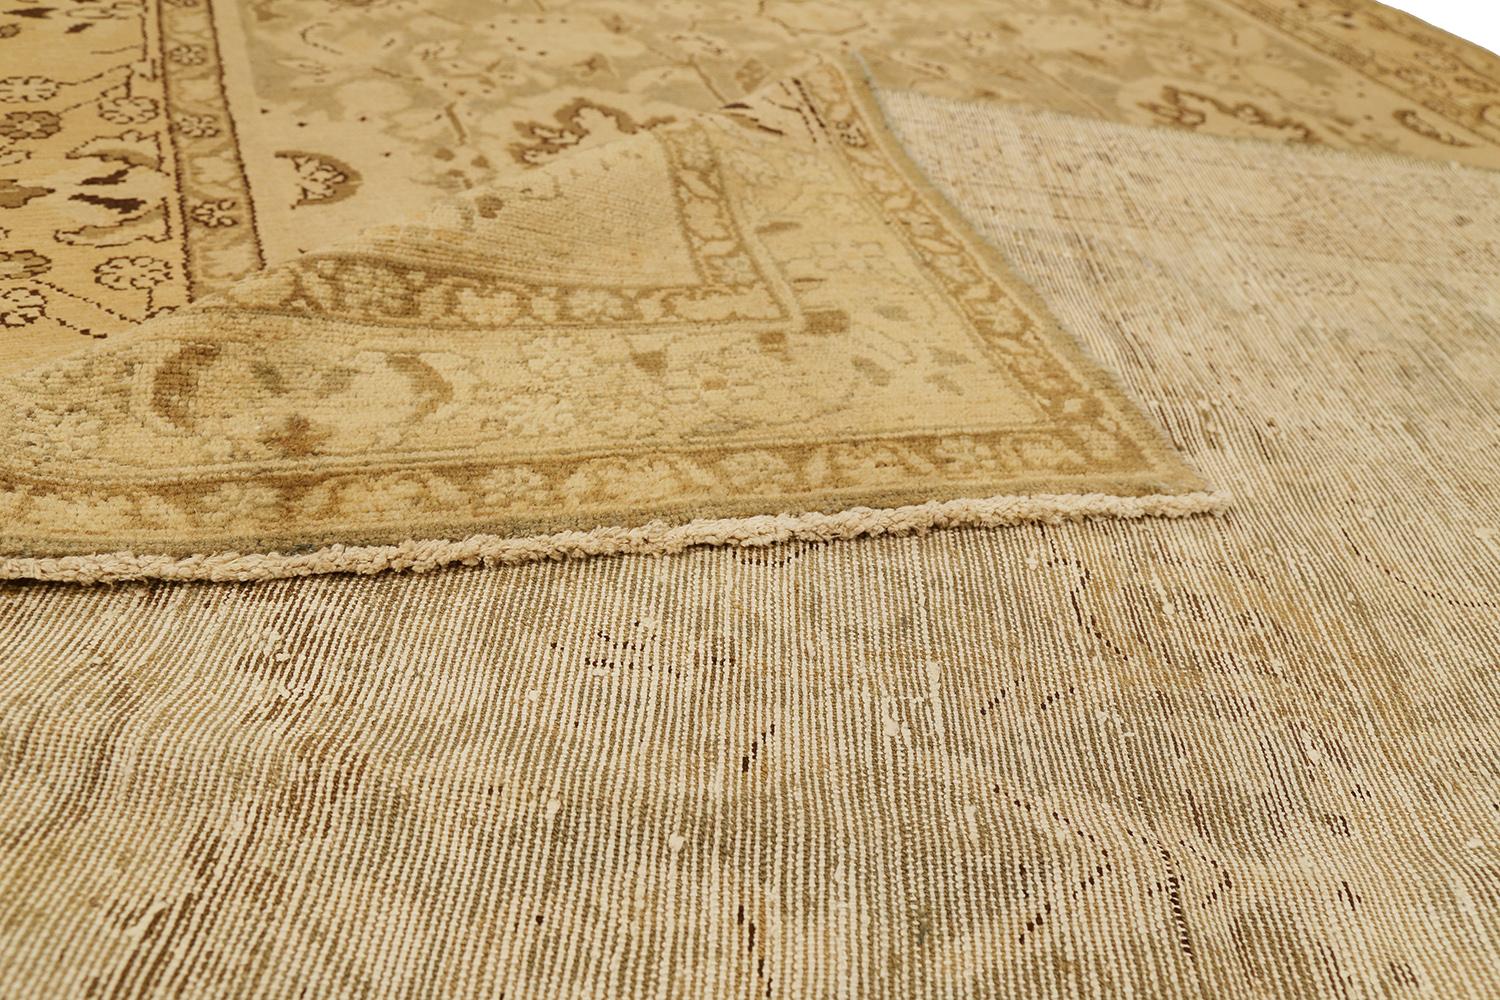 Antique Persian Malayer Rug with Beige & Brown Botanical Details on Ivory Field In Excellent Condition For Sale In Dallas, TX